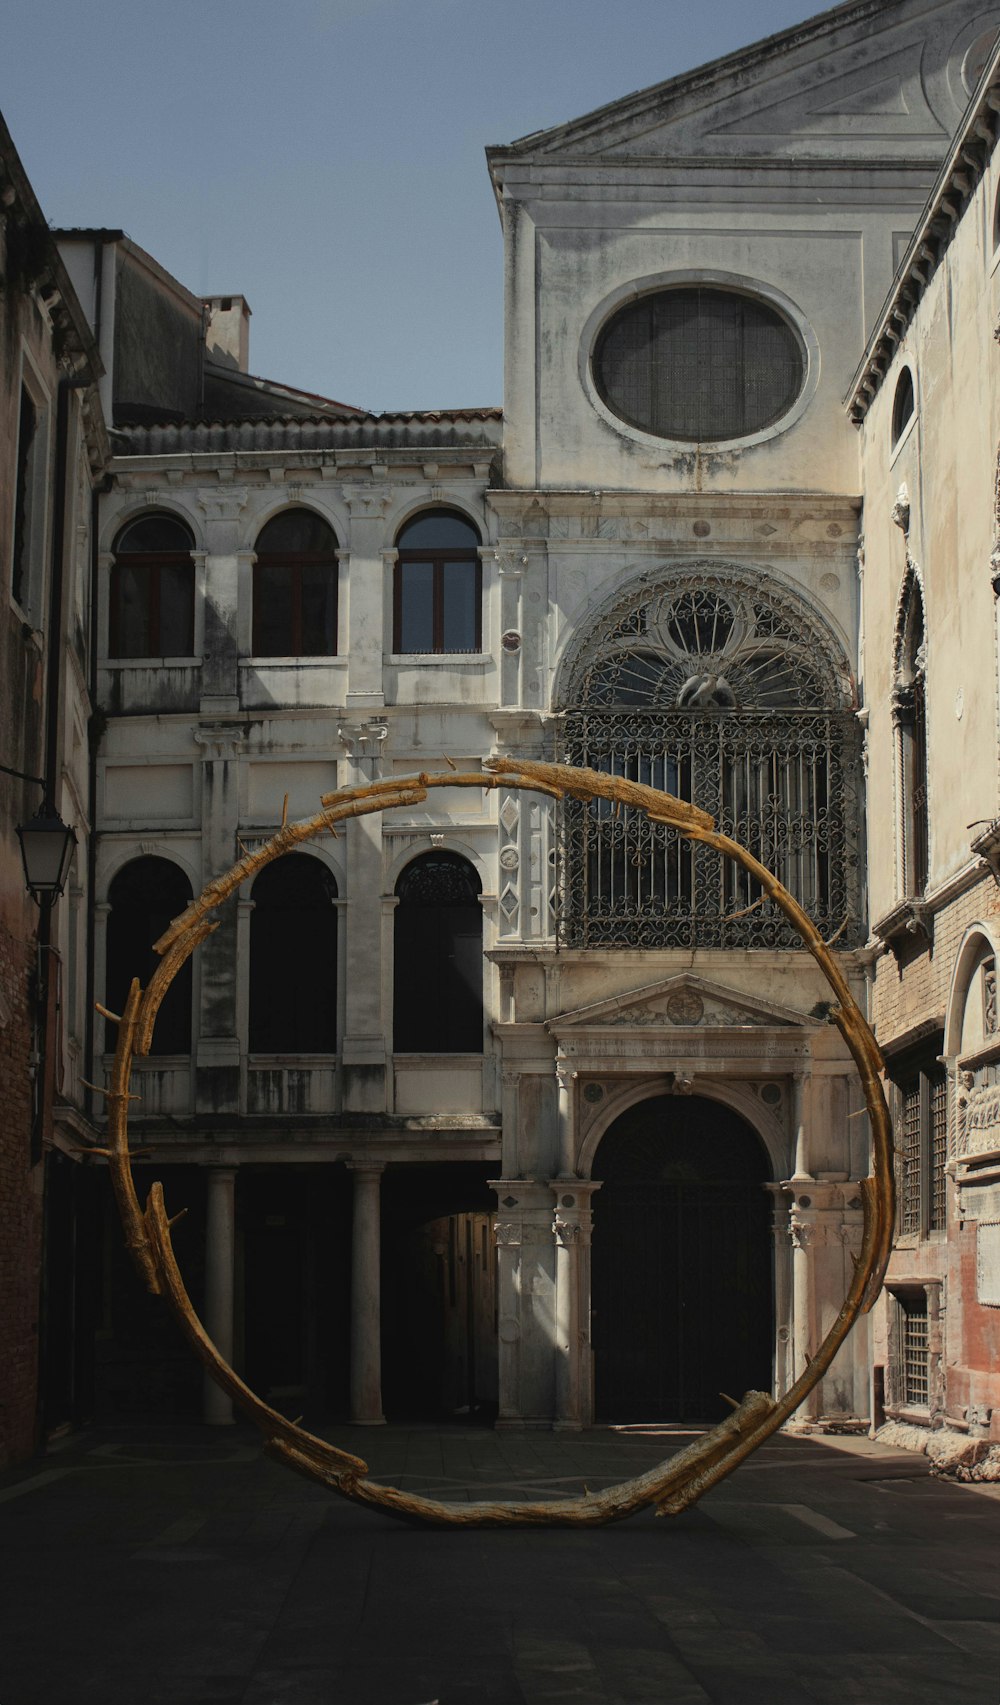 a large circular object in the middle of a courtyard